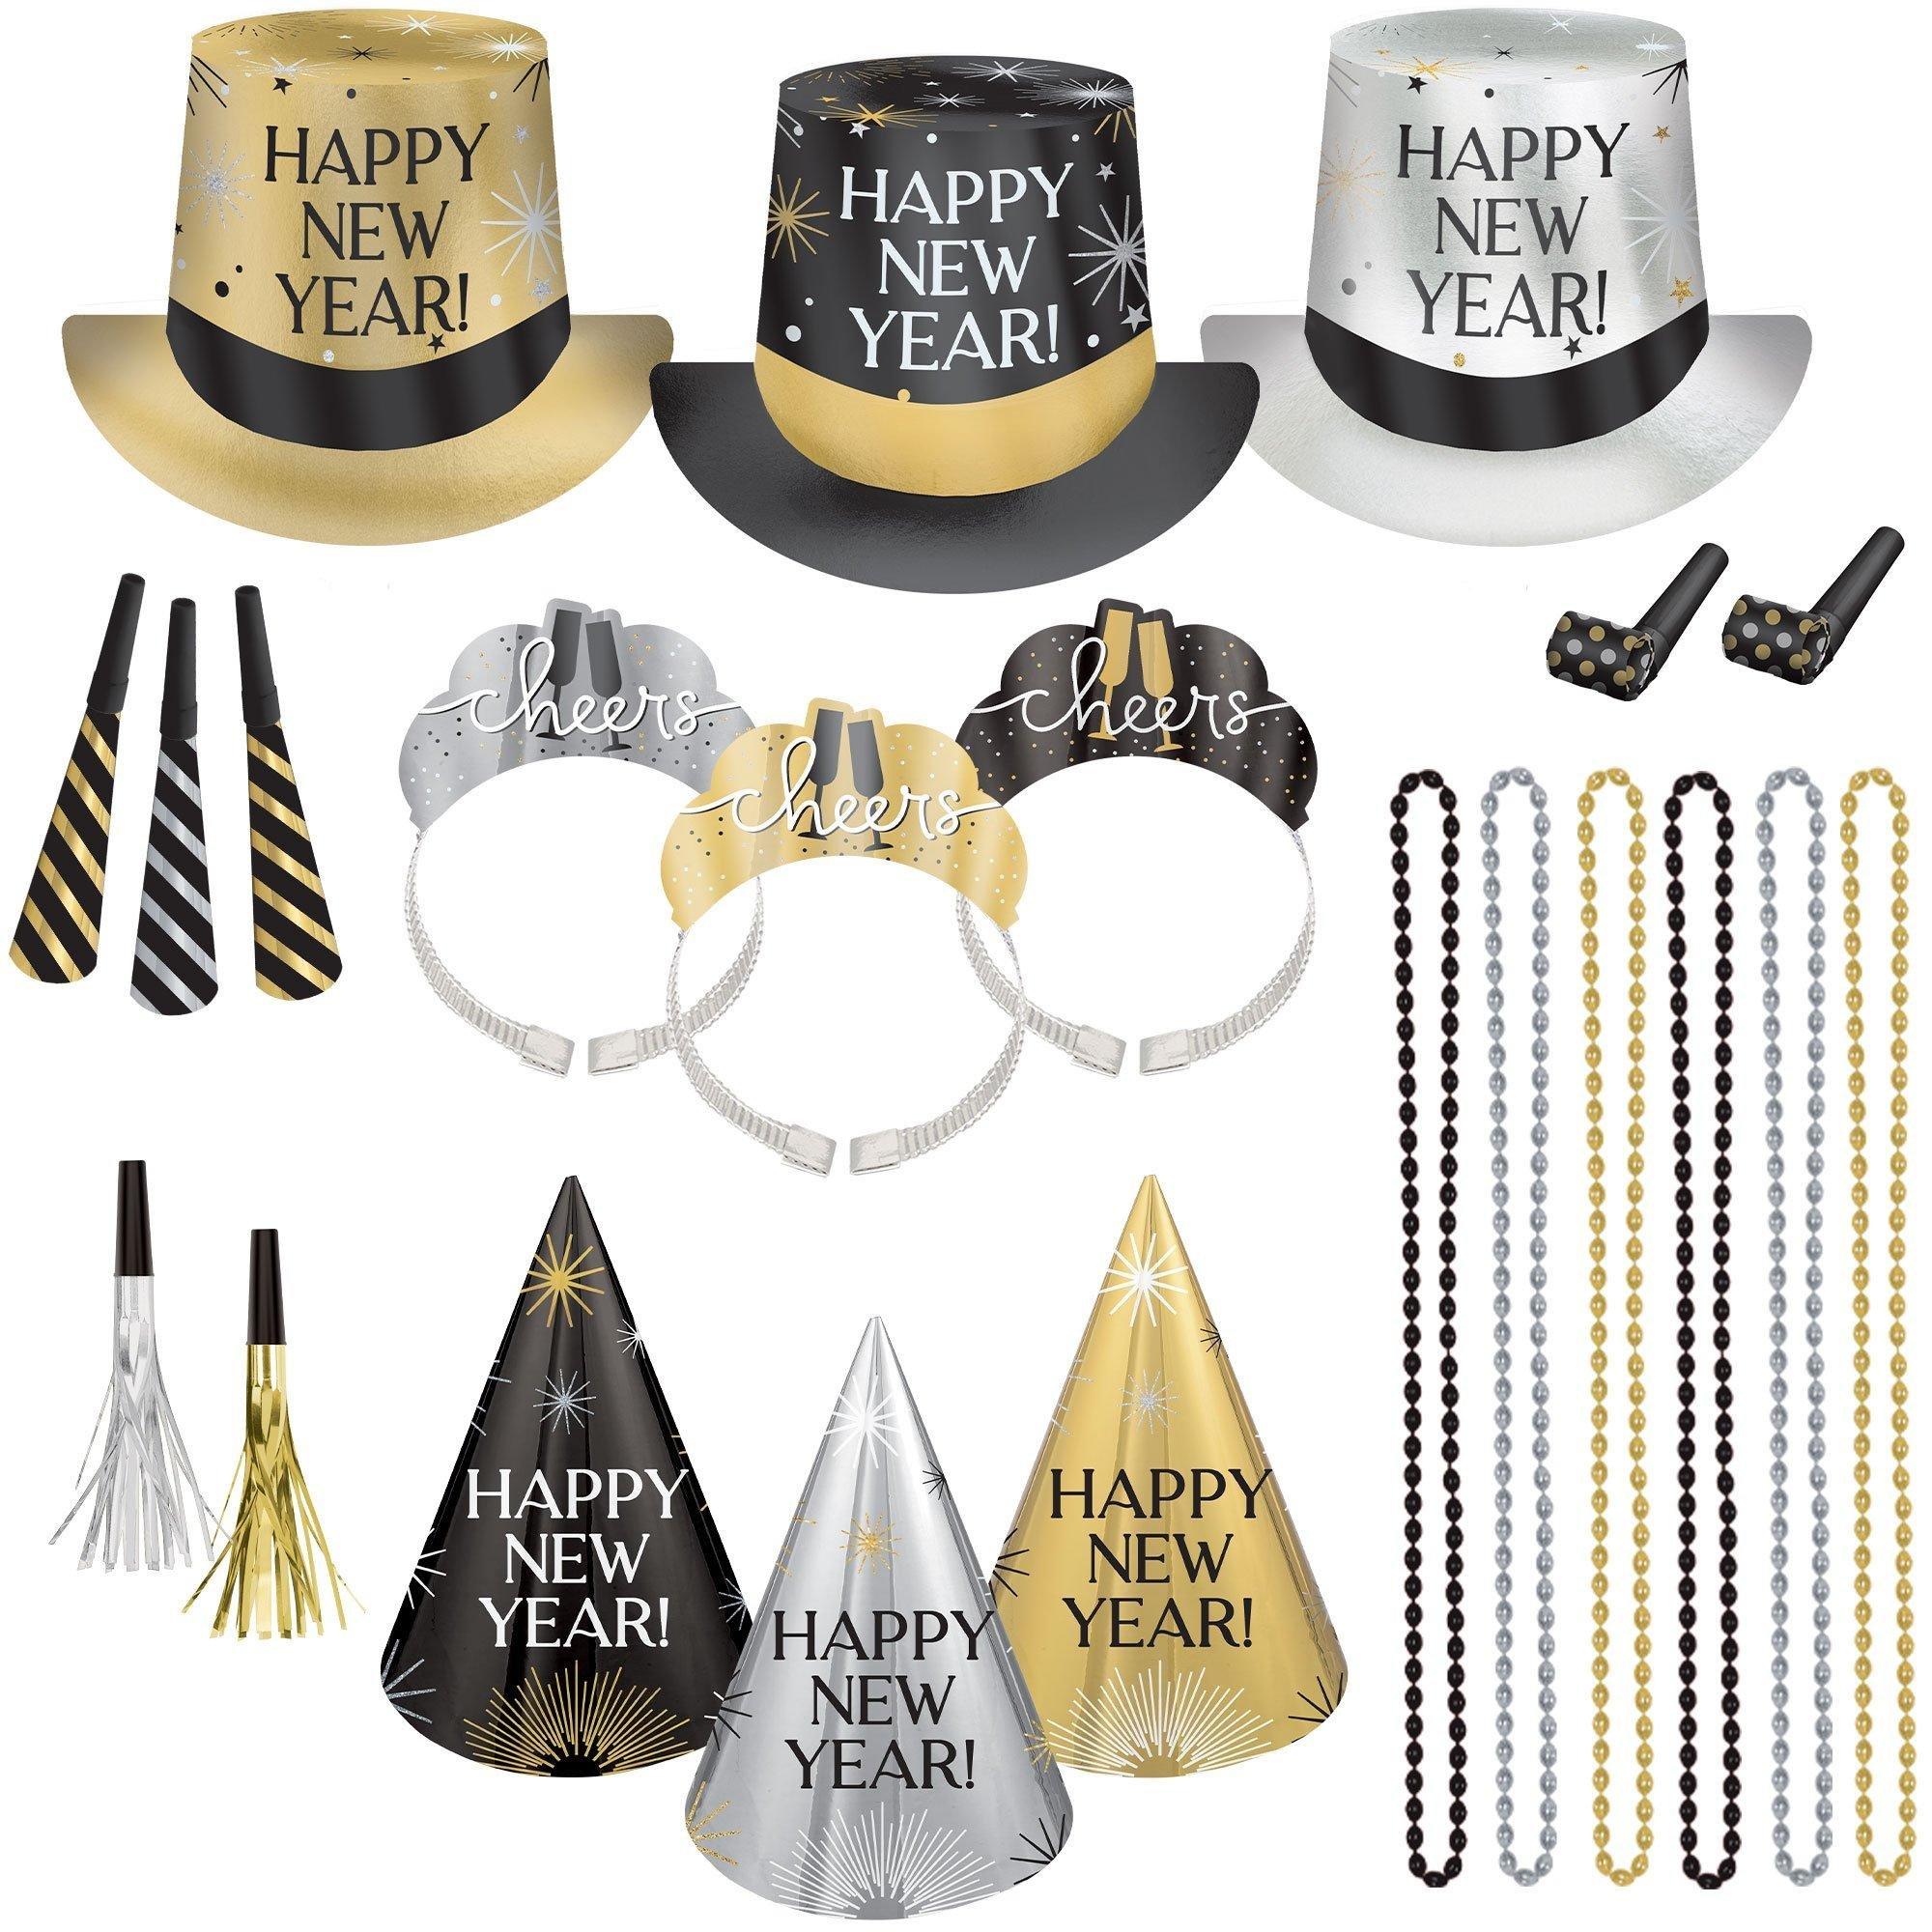 Black, Silver, & Gold Cheers New Year's Eve Party Kit